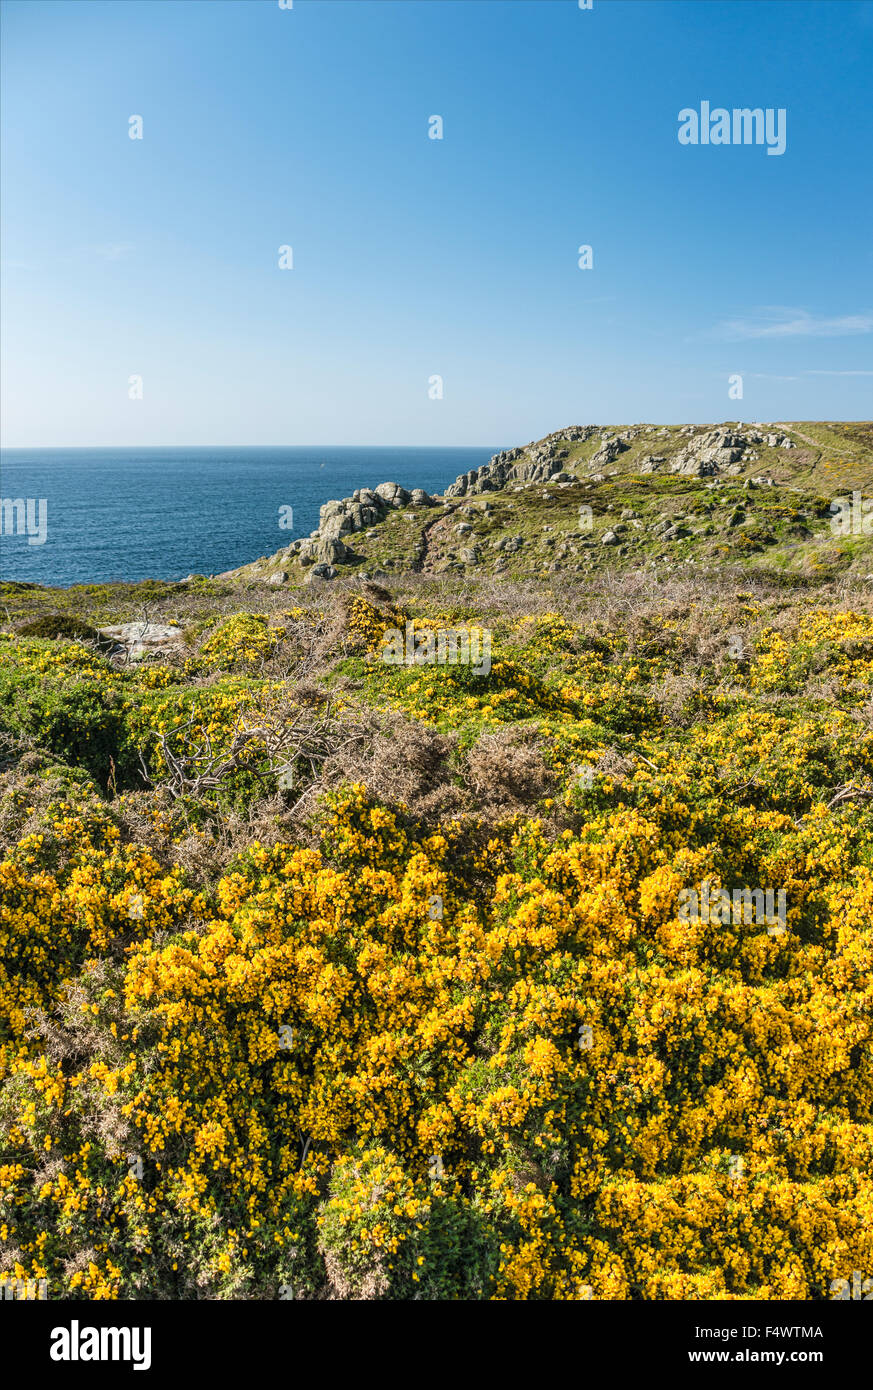 Yellow Gorse flower in a scenic coastal landscape at Lands End, Cornwall, England, UK Stock Photo